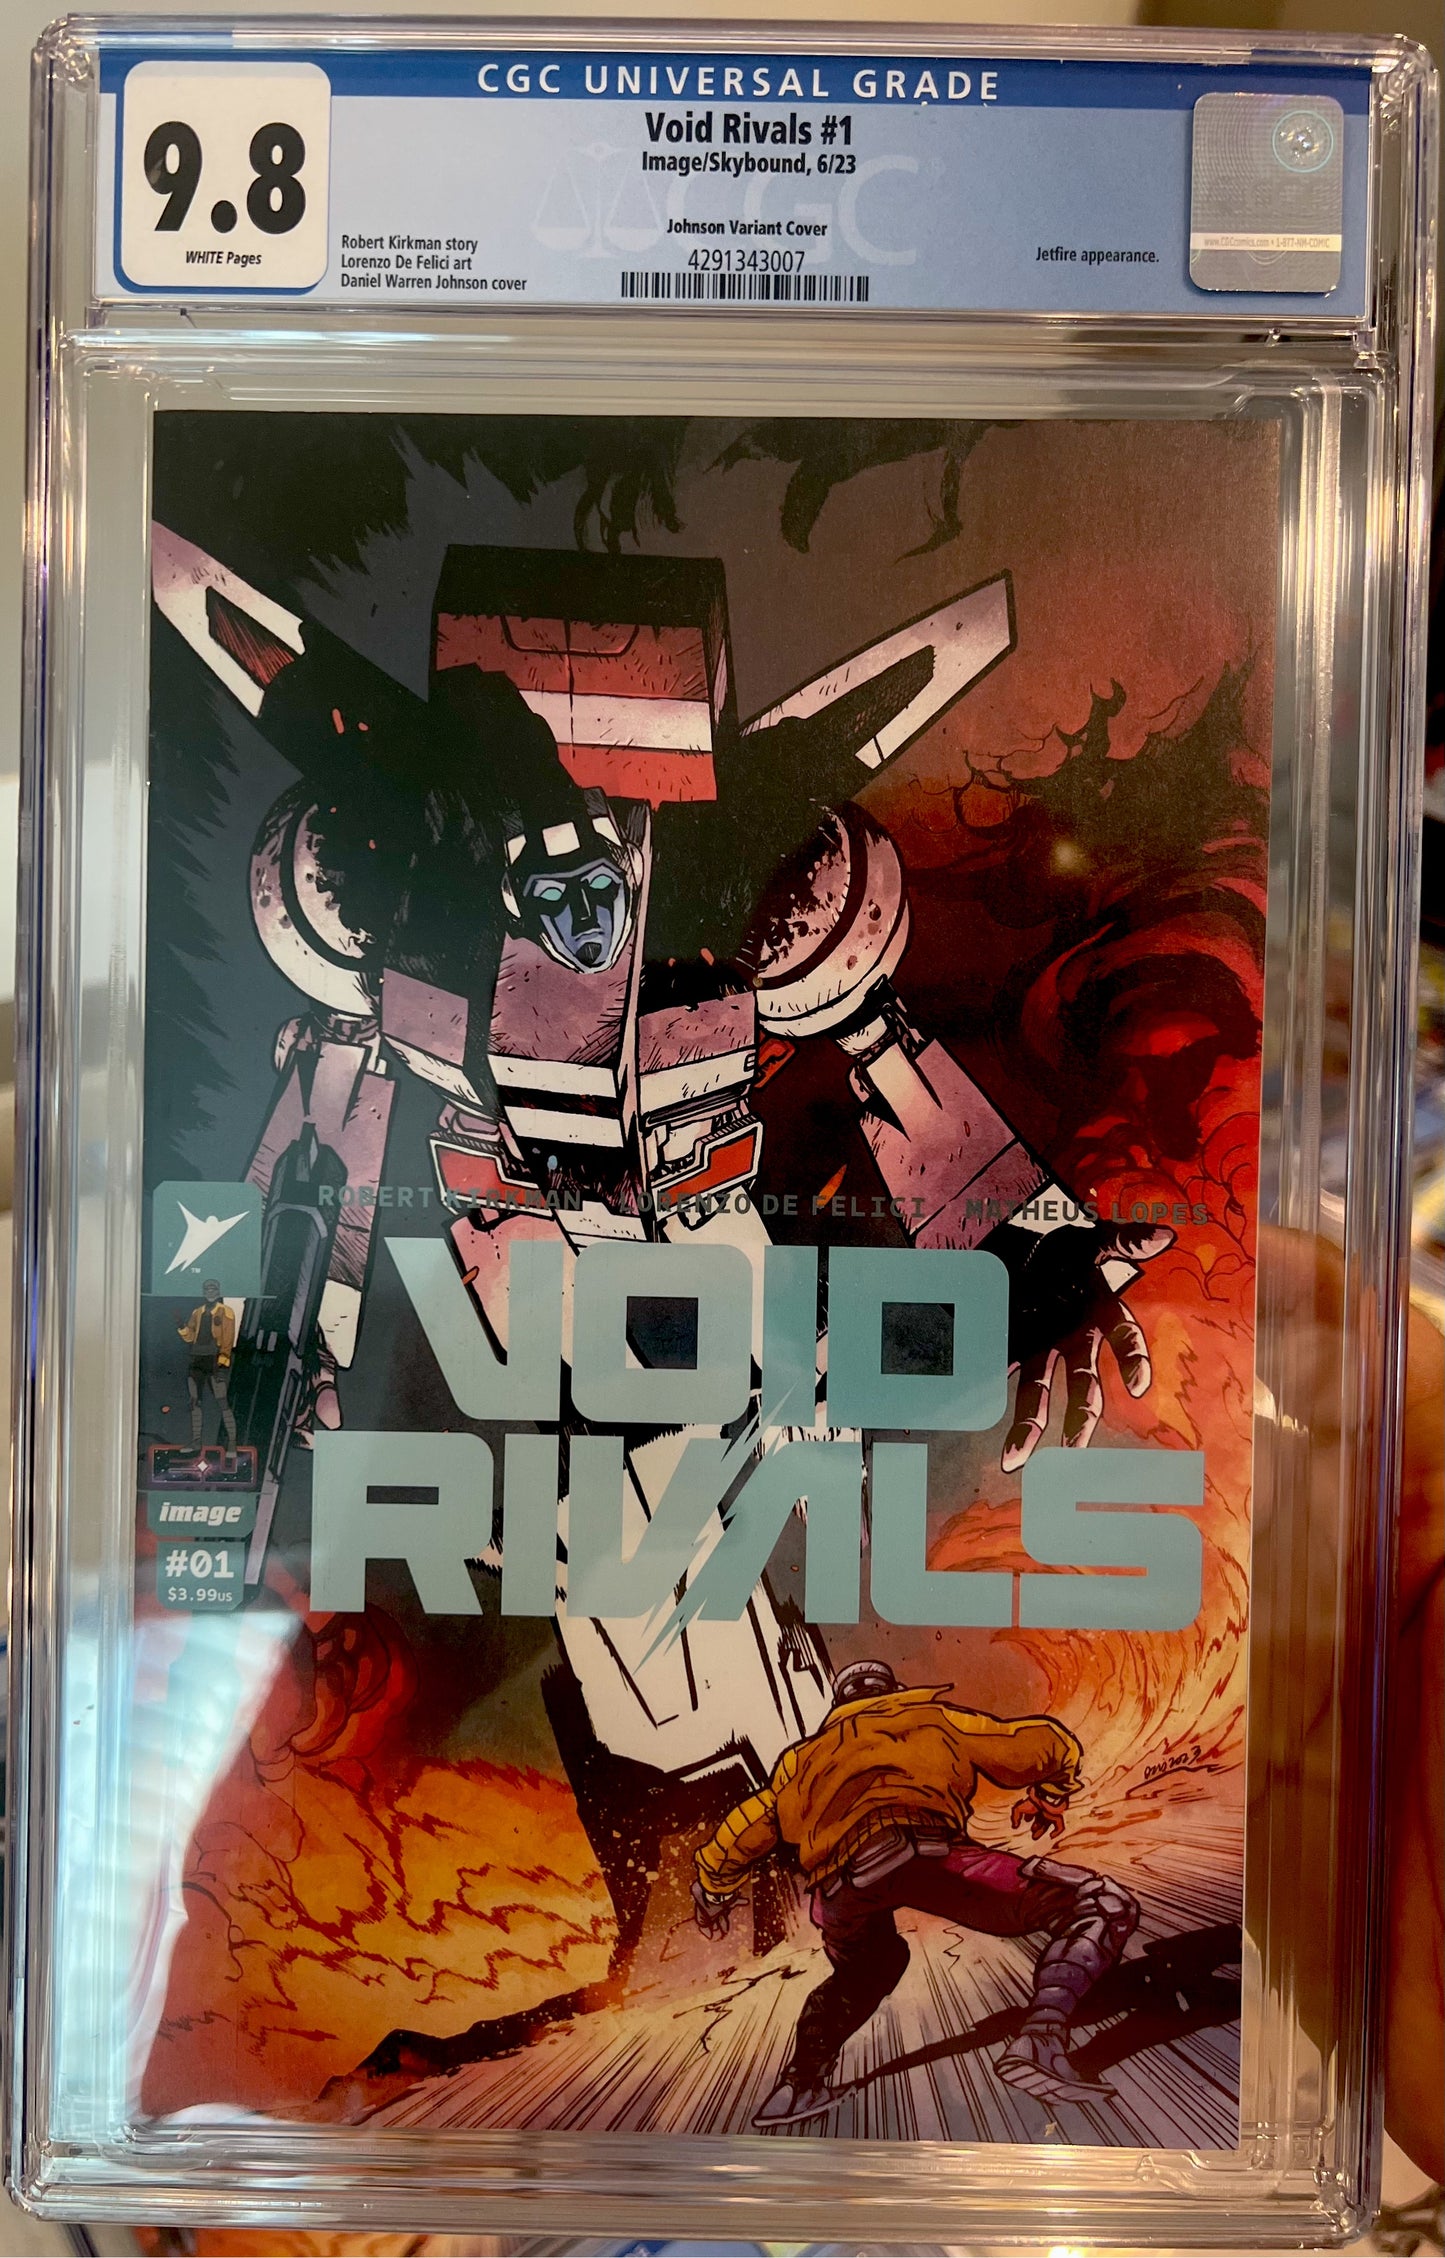 Void Rivals #1 CGC 9.8 (1:100 Incentive Cover)